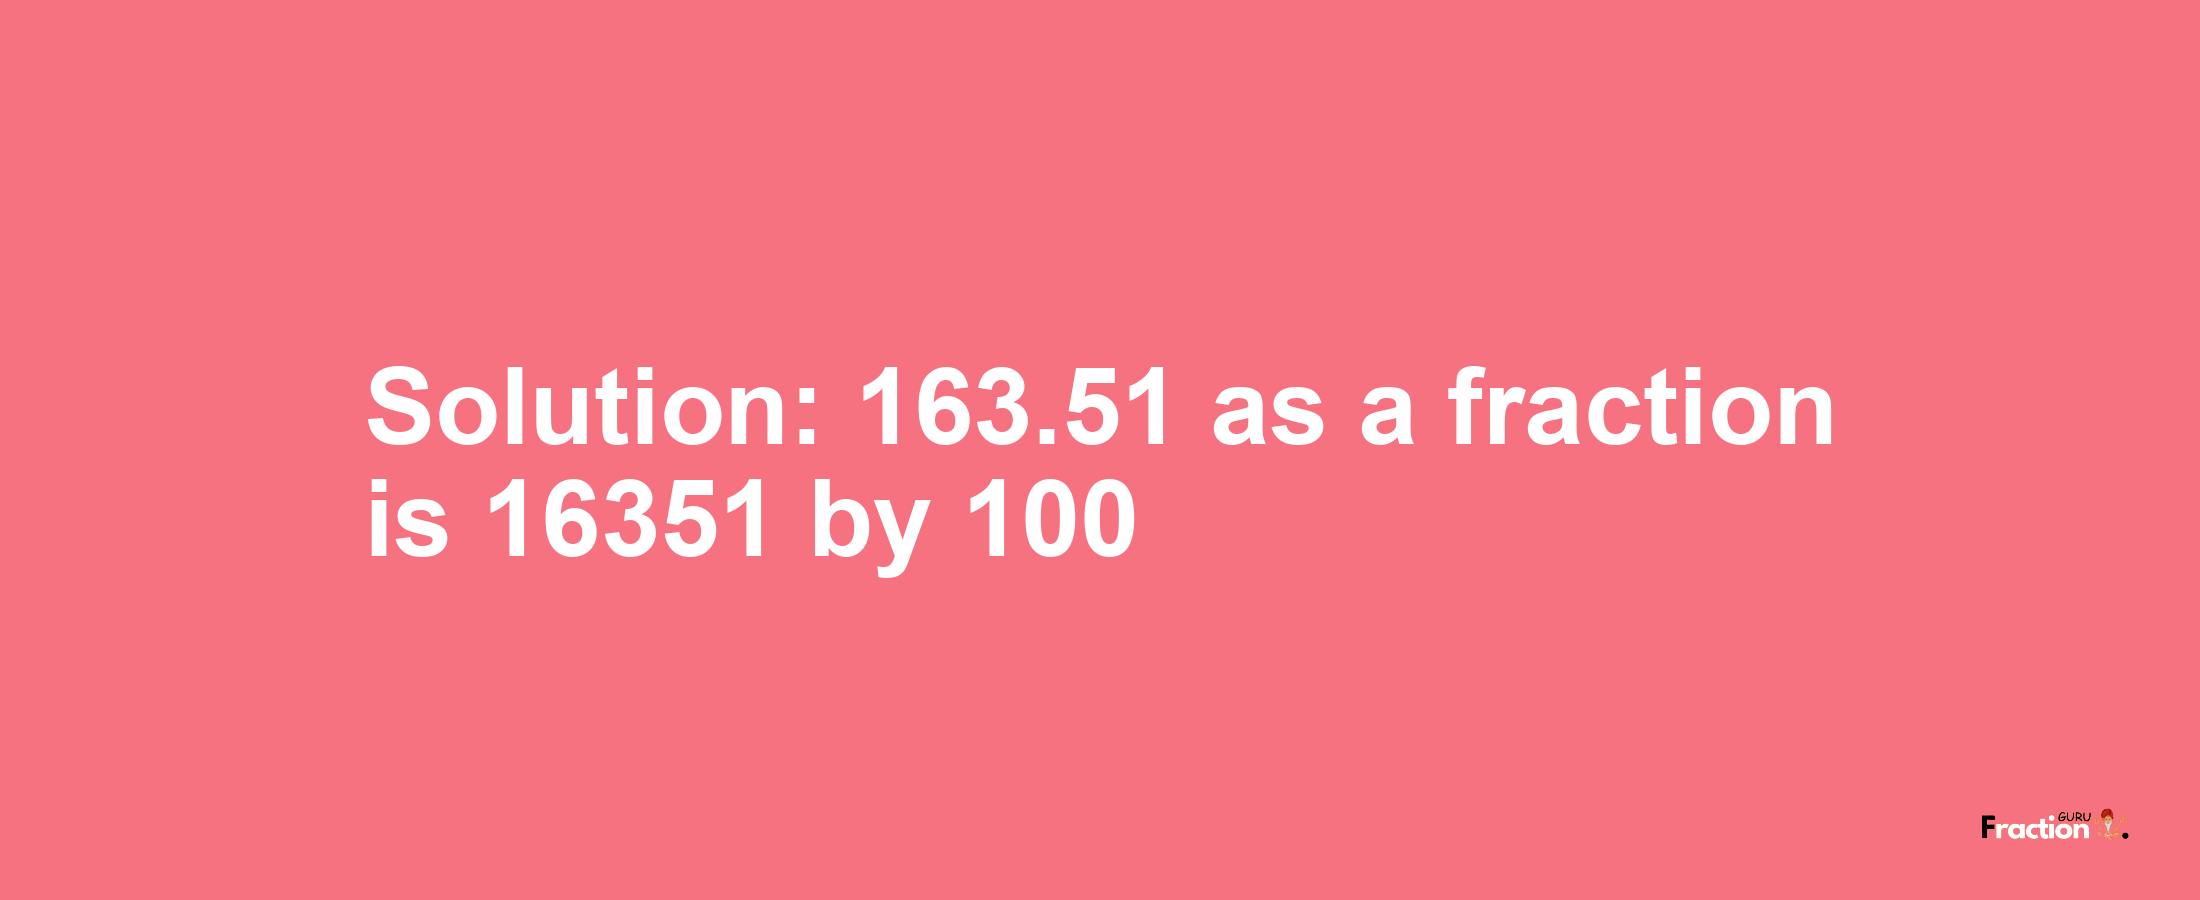 Solution:163.51 as a fraction is 16351/100